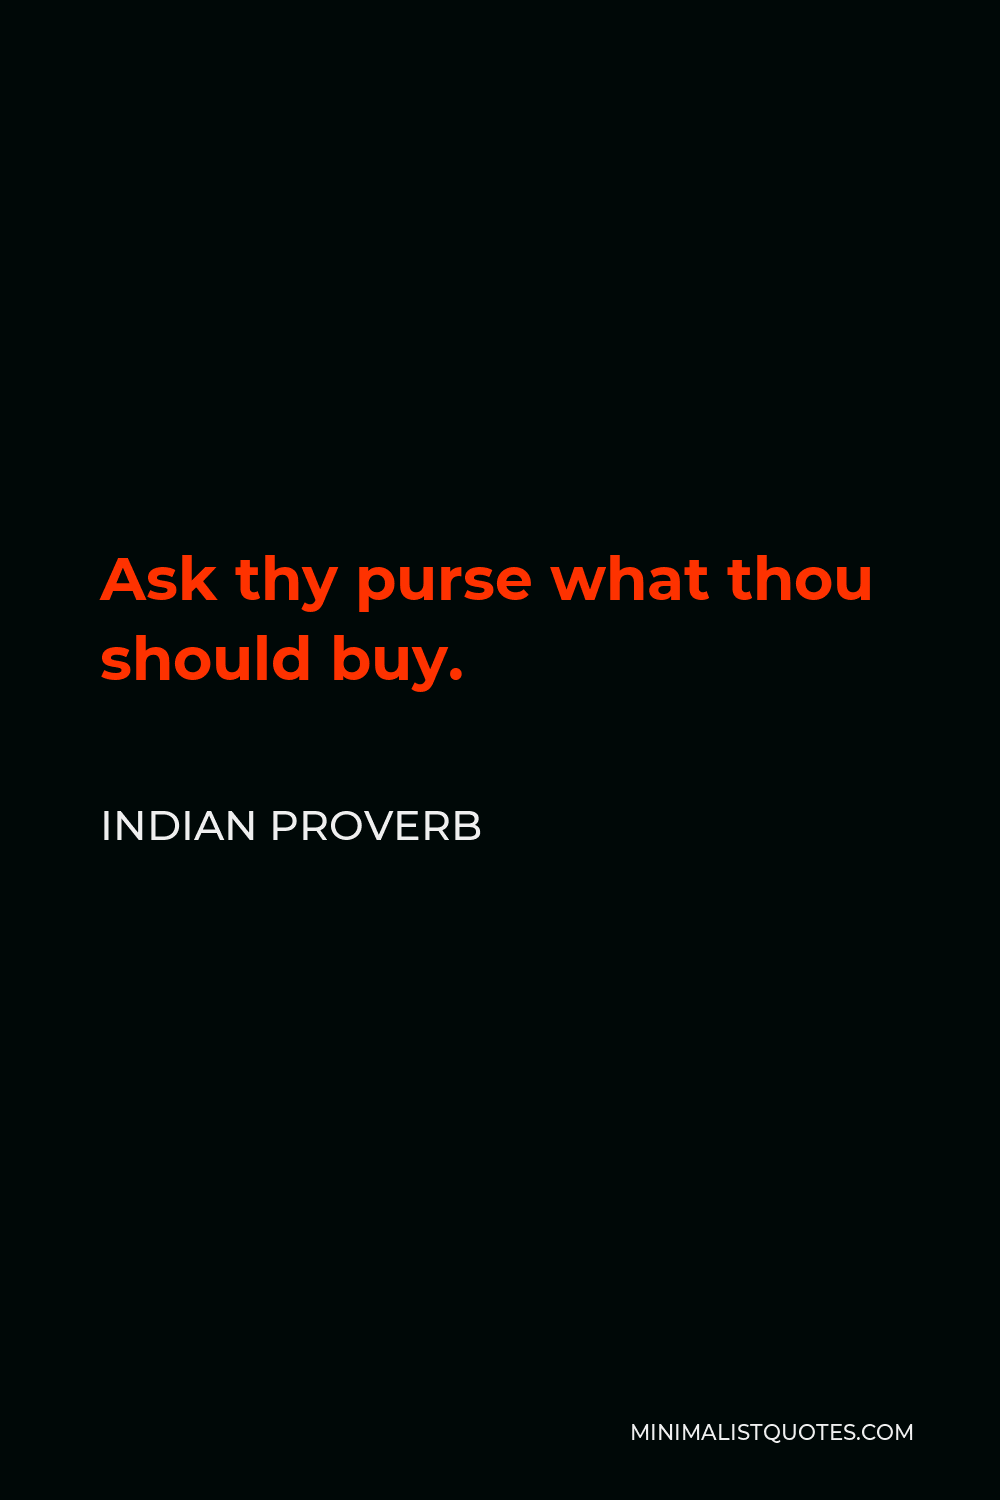 Indian Proverb Quote - Ask thy purse what thou should buy.